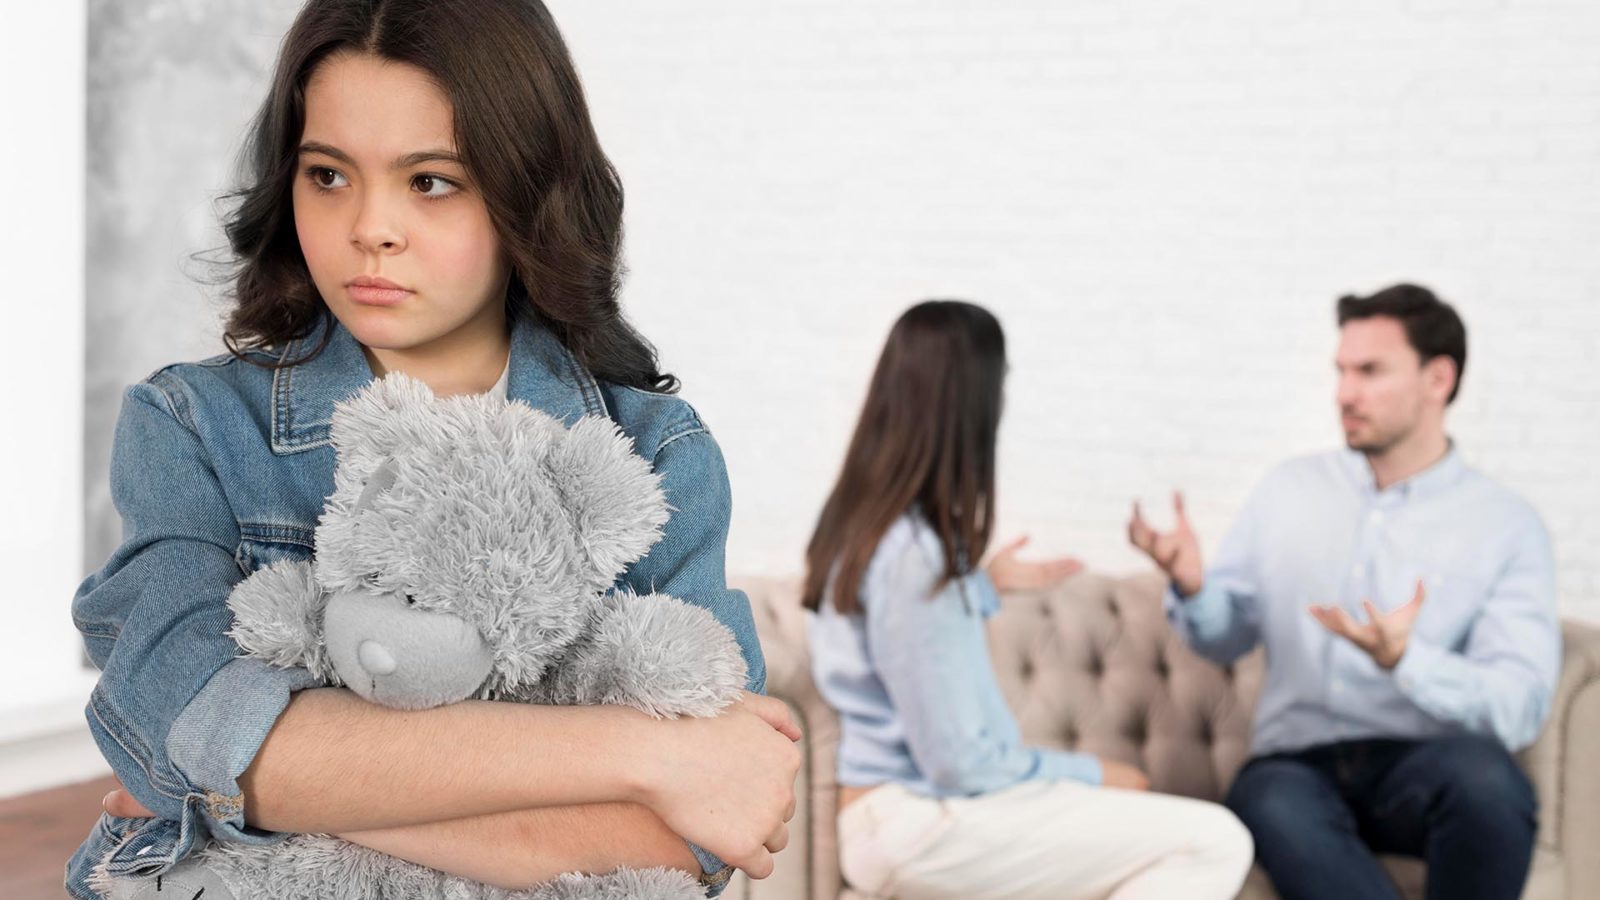 child holding a teddy bear while couple fights in background